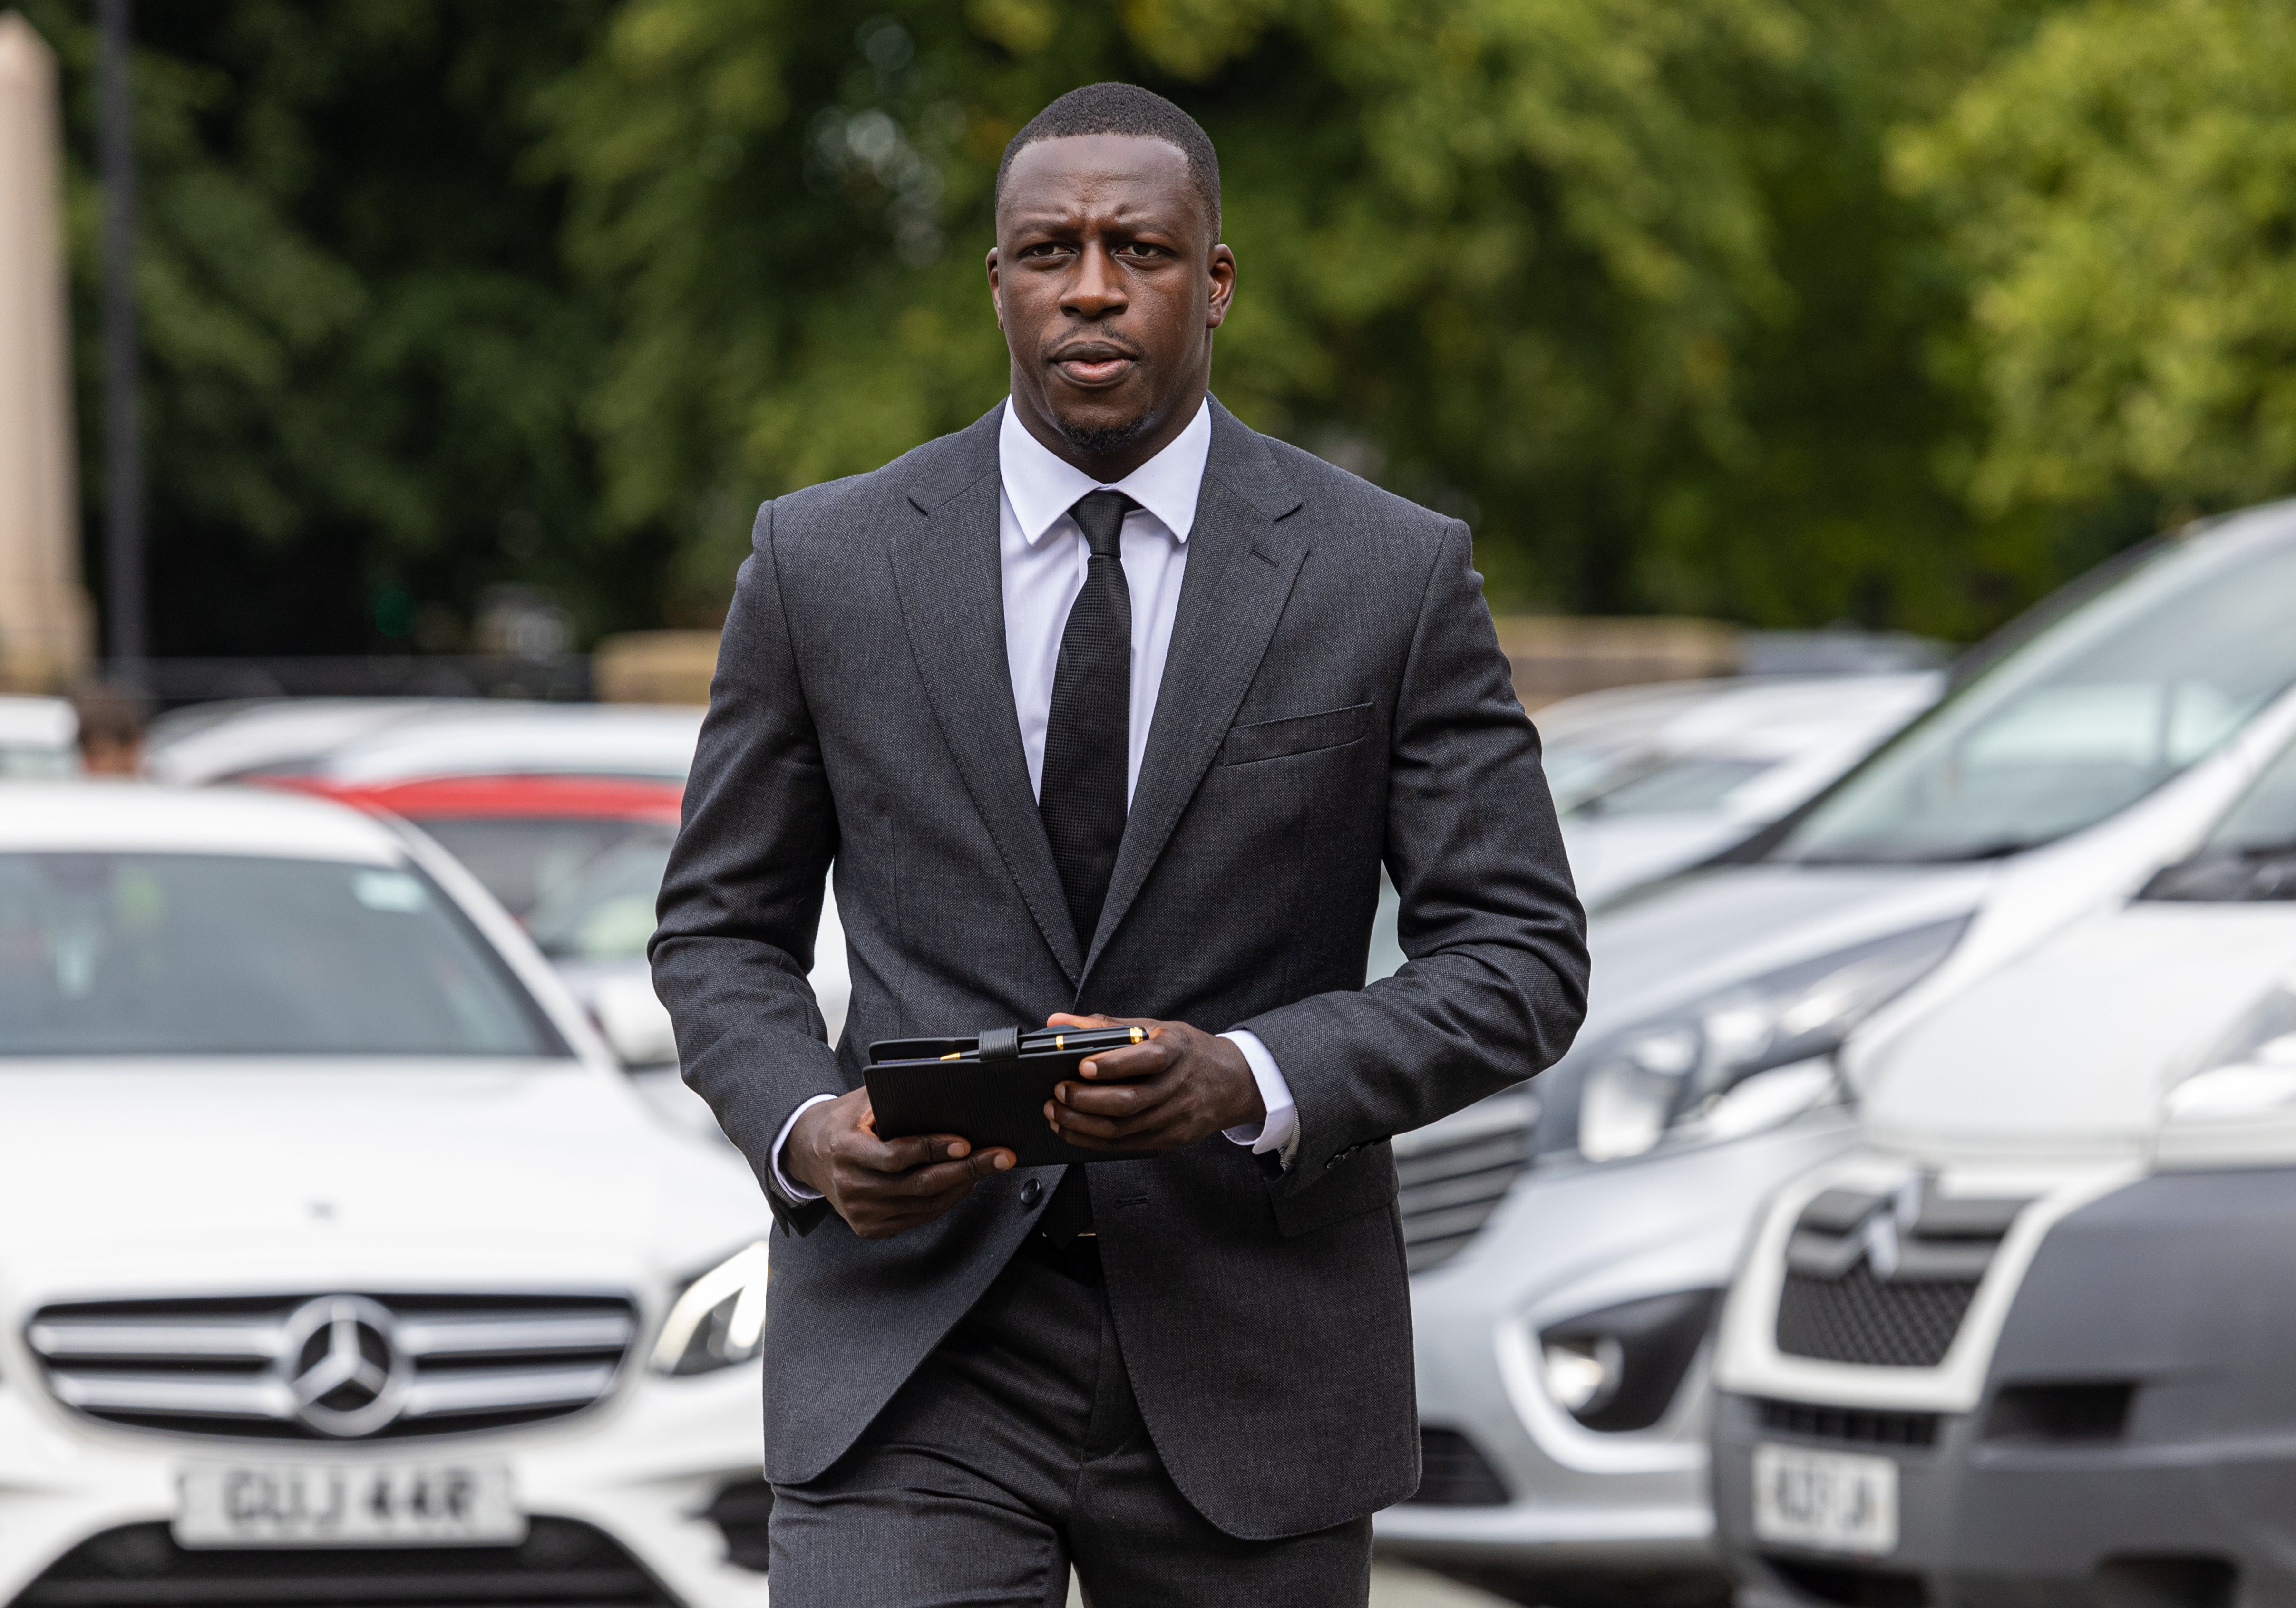 Manchester City footballer Benjamin Mendy arrives at Chester Crown Court where he is accused of eight counts of rape, one count of sexual assault and one count of attempted rape, relating to seven women. Picture date: Wednesday August 24, 2022 (David Rawcliffe/PA)